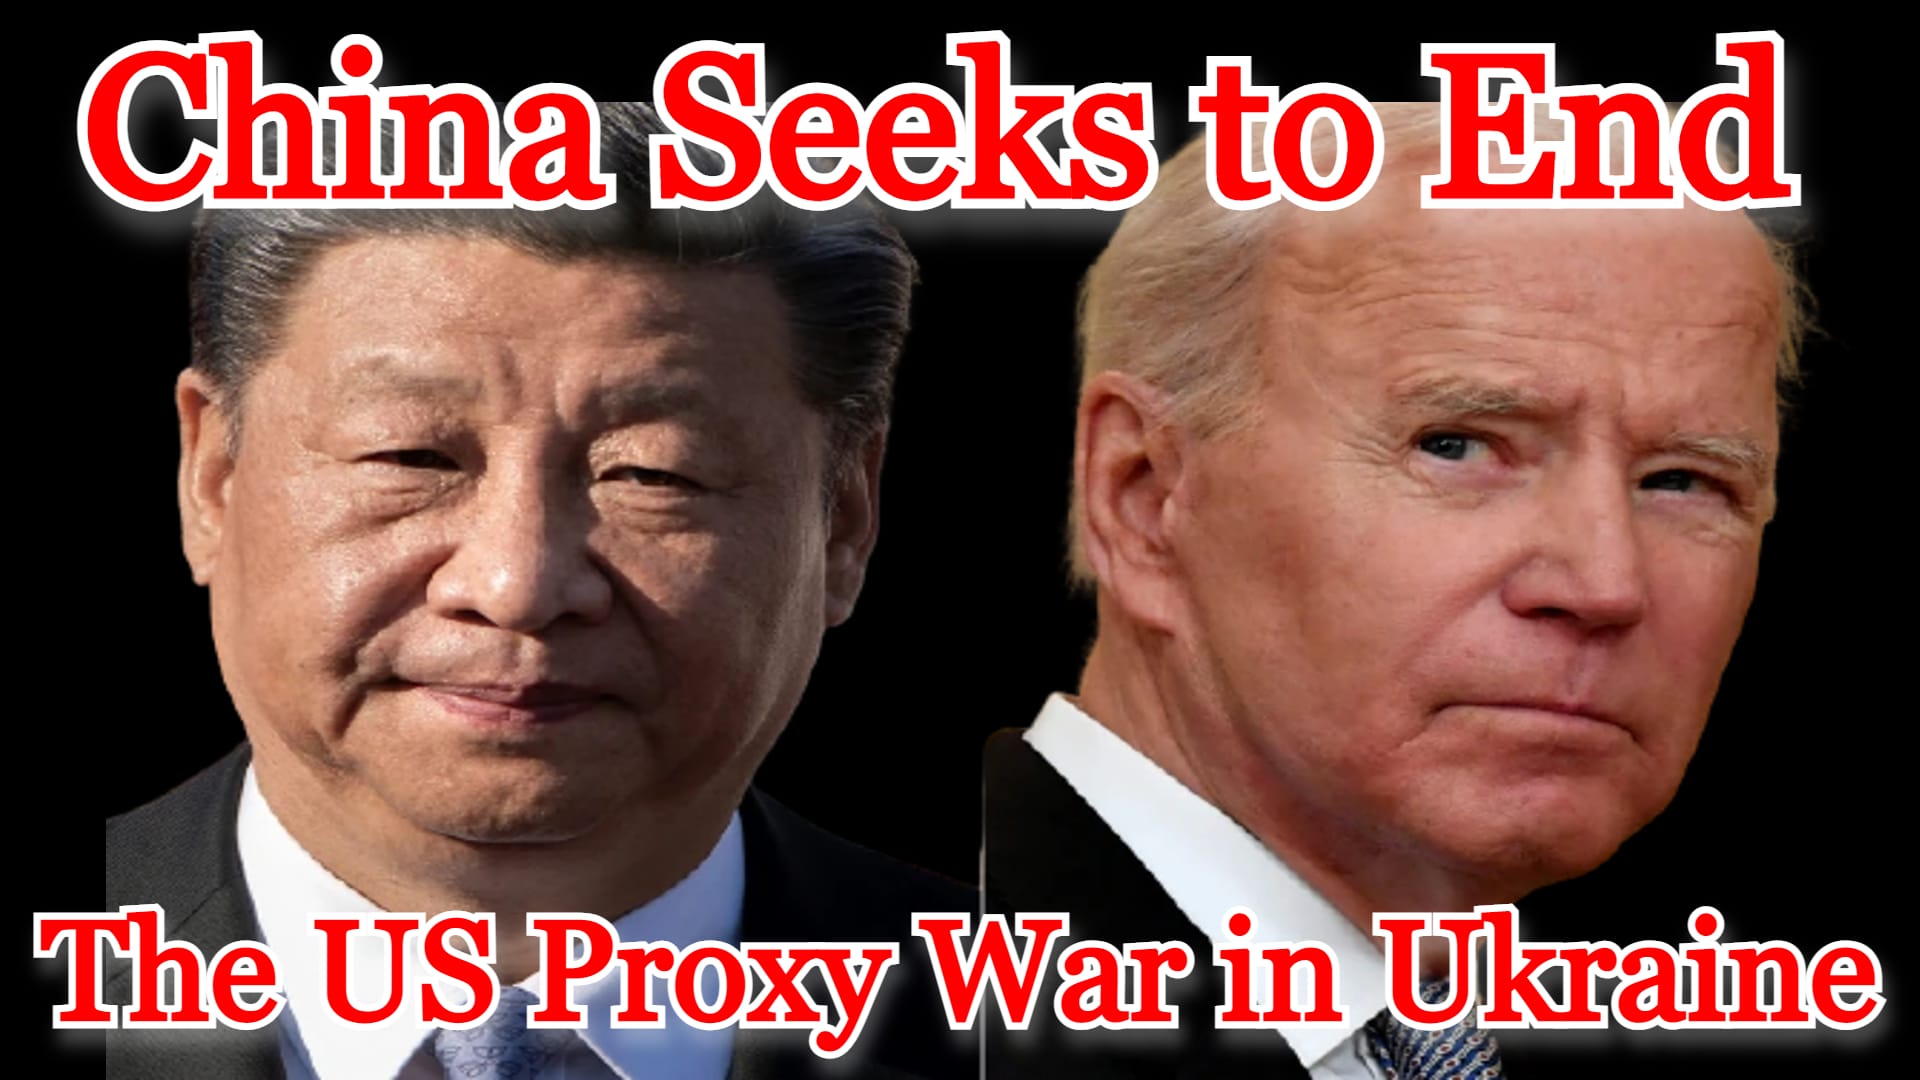 COI #389: China Seeks to End the US Proxy War in Ukraine